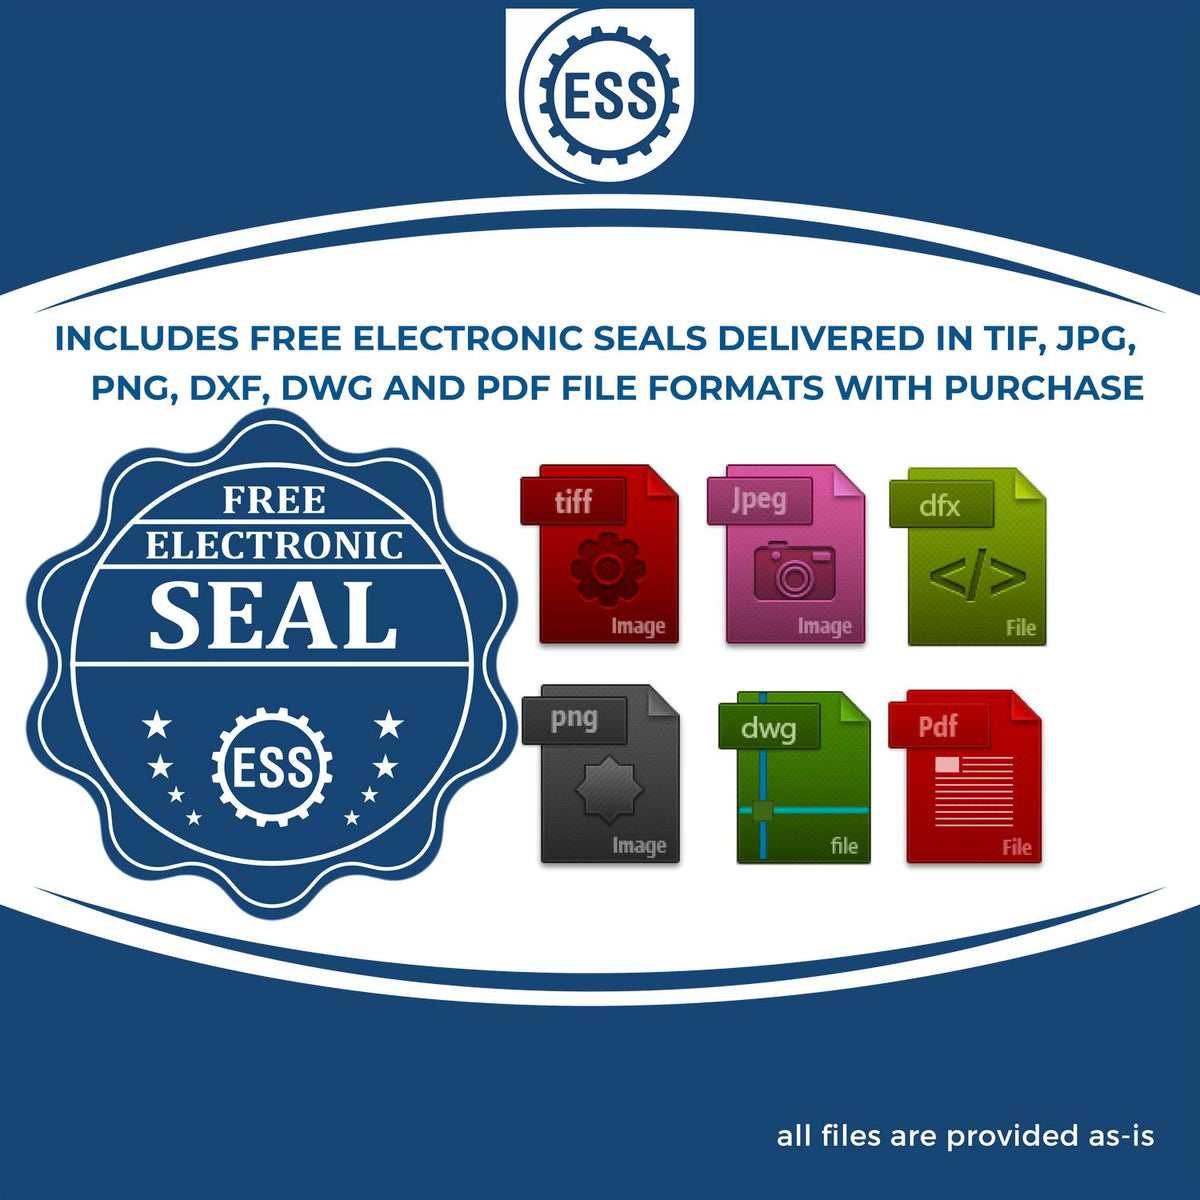 An infographic for the free electronic seal for the Extended Long Reach Washington Architect Seal Embosser illustrating the different file type icons such as DXF, DWG, TIF, JPG and PNG.